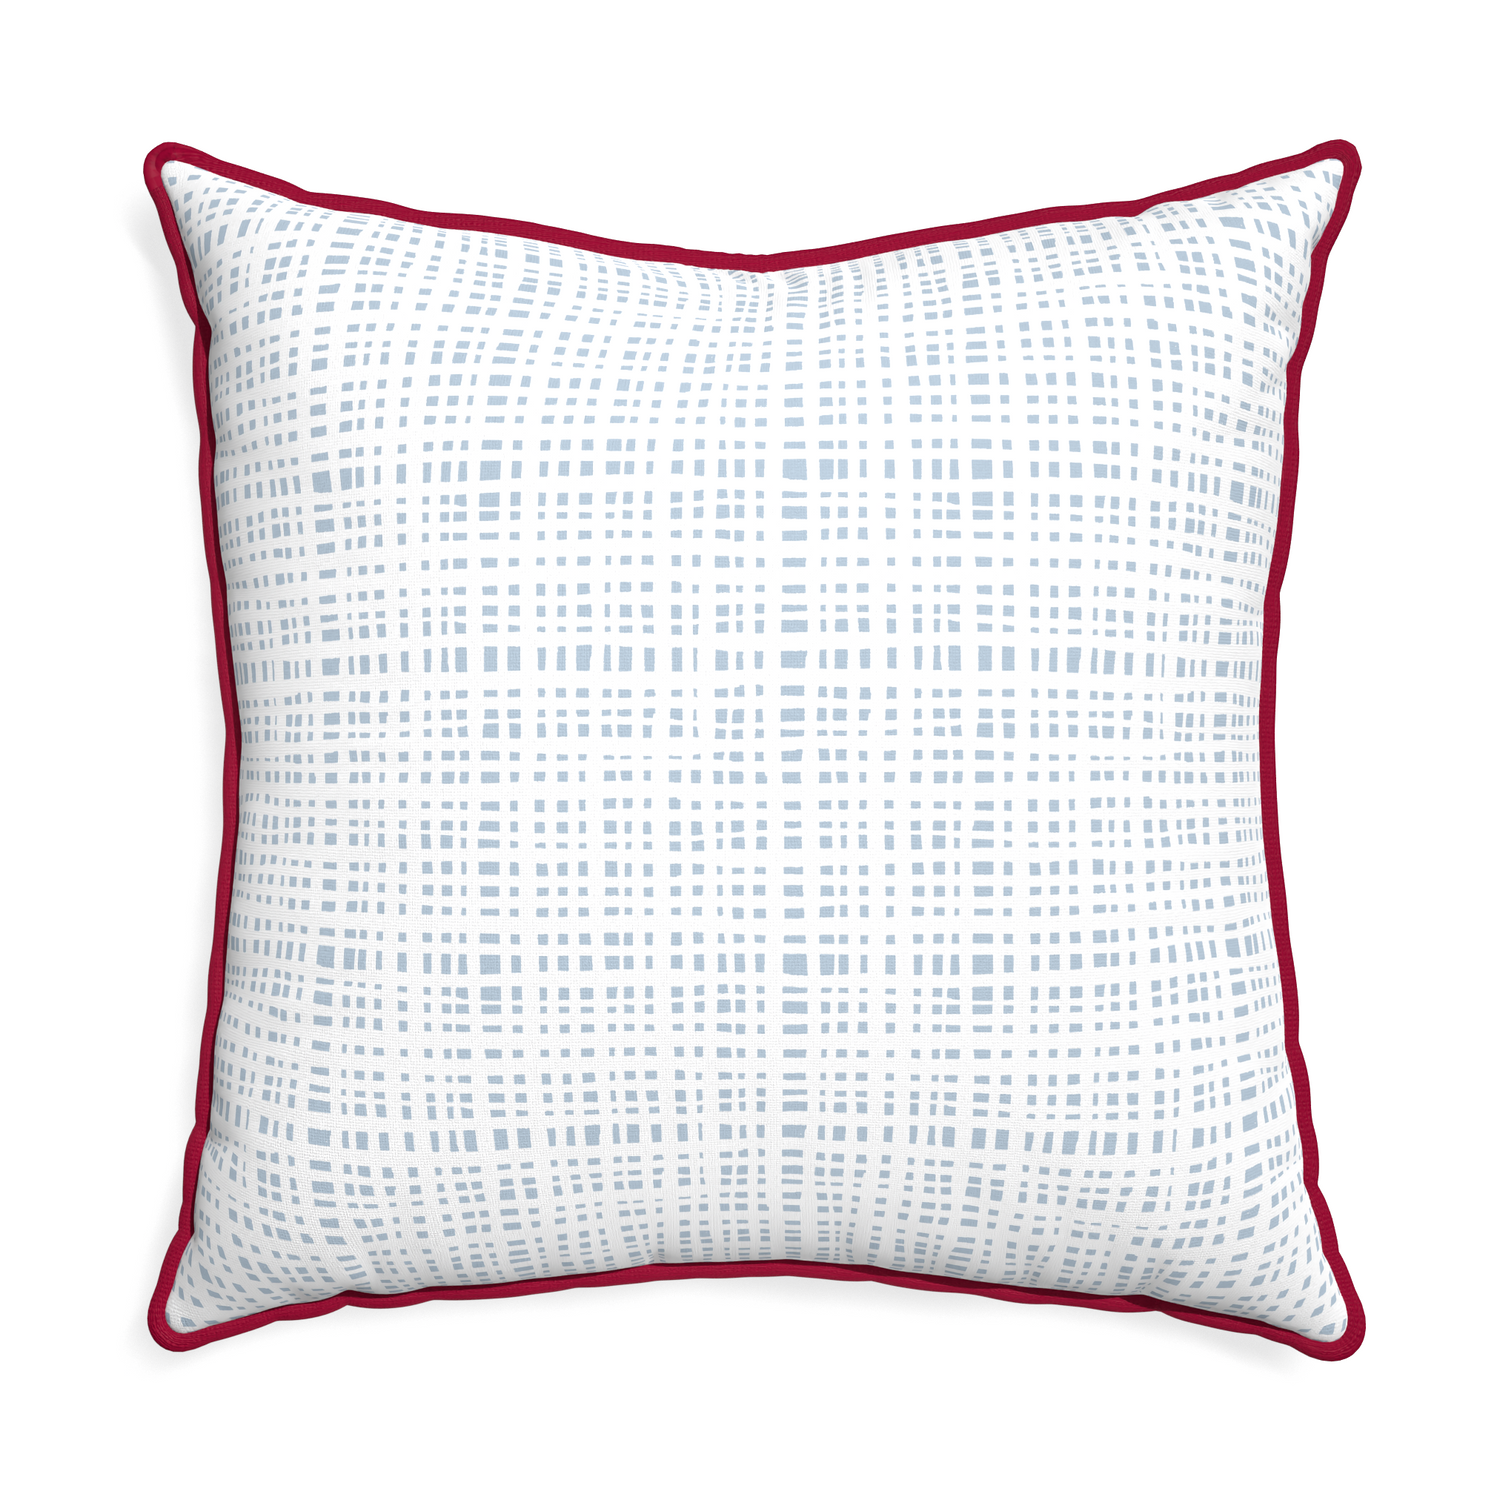 Euro-sham ginger sky custom pillow with raspberry piping on white background